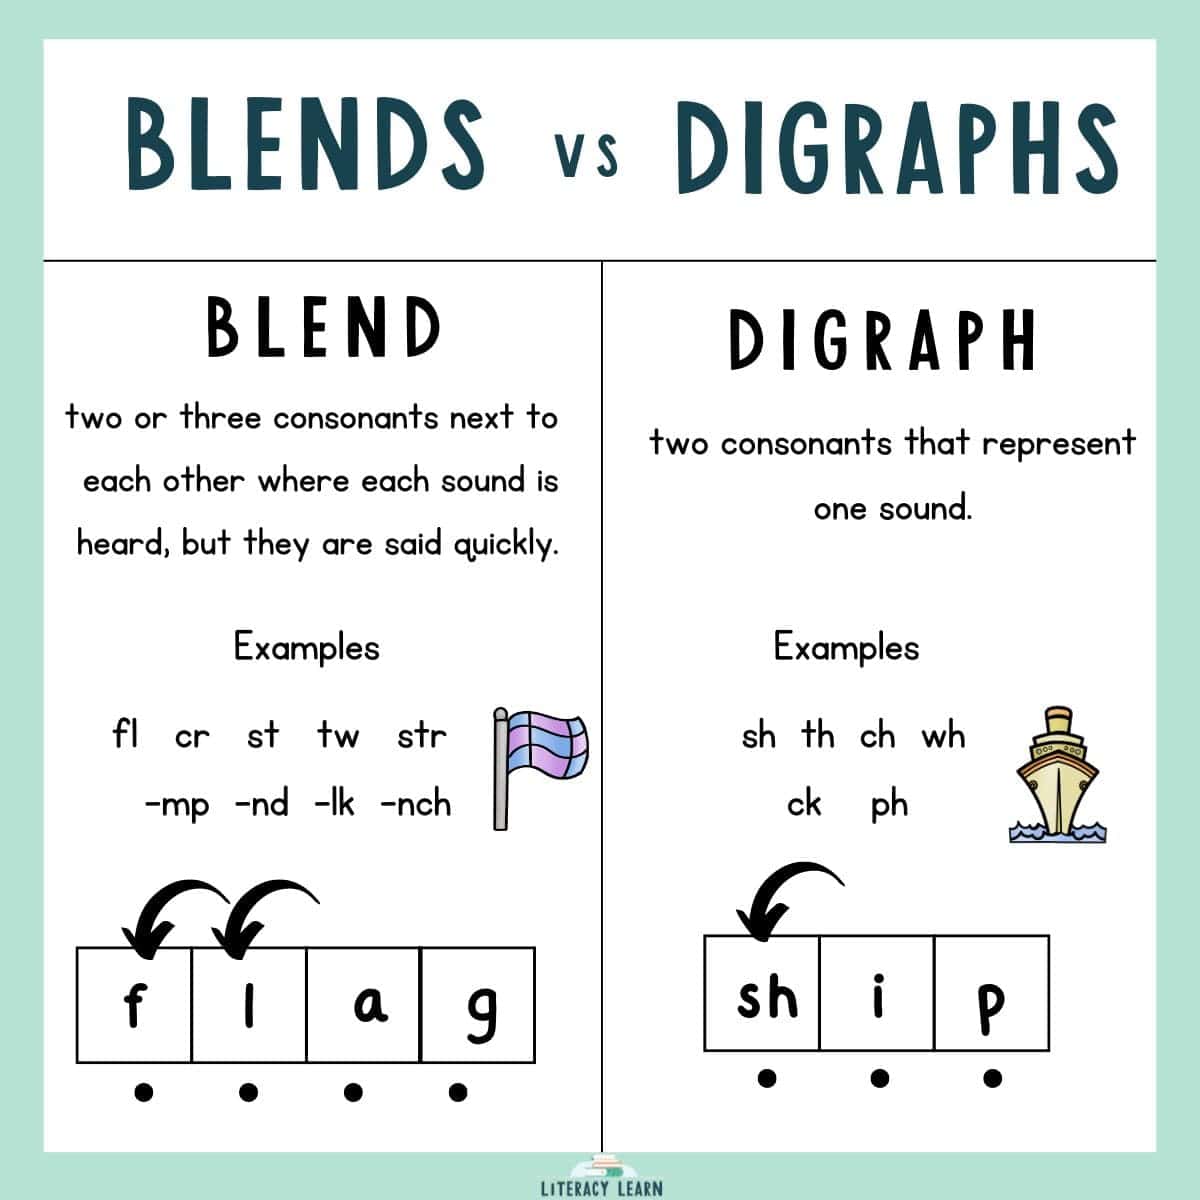 Graphic showing blends versus digraphs with definitions, examples, and words and pictures.